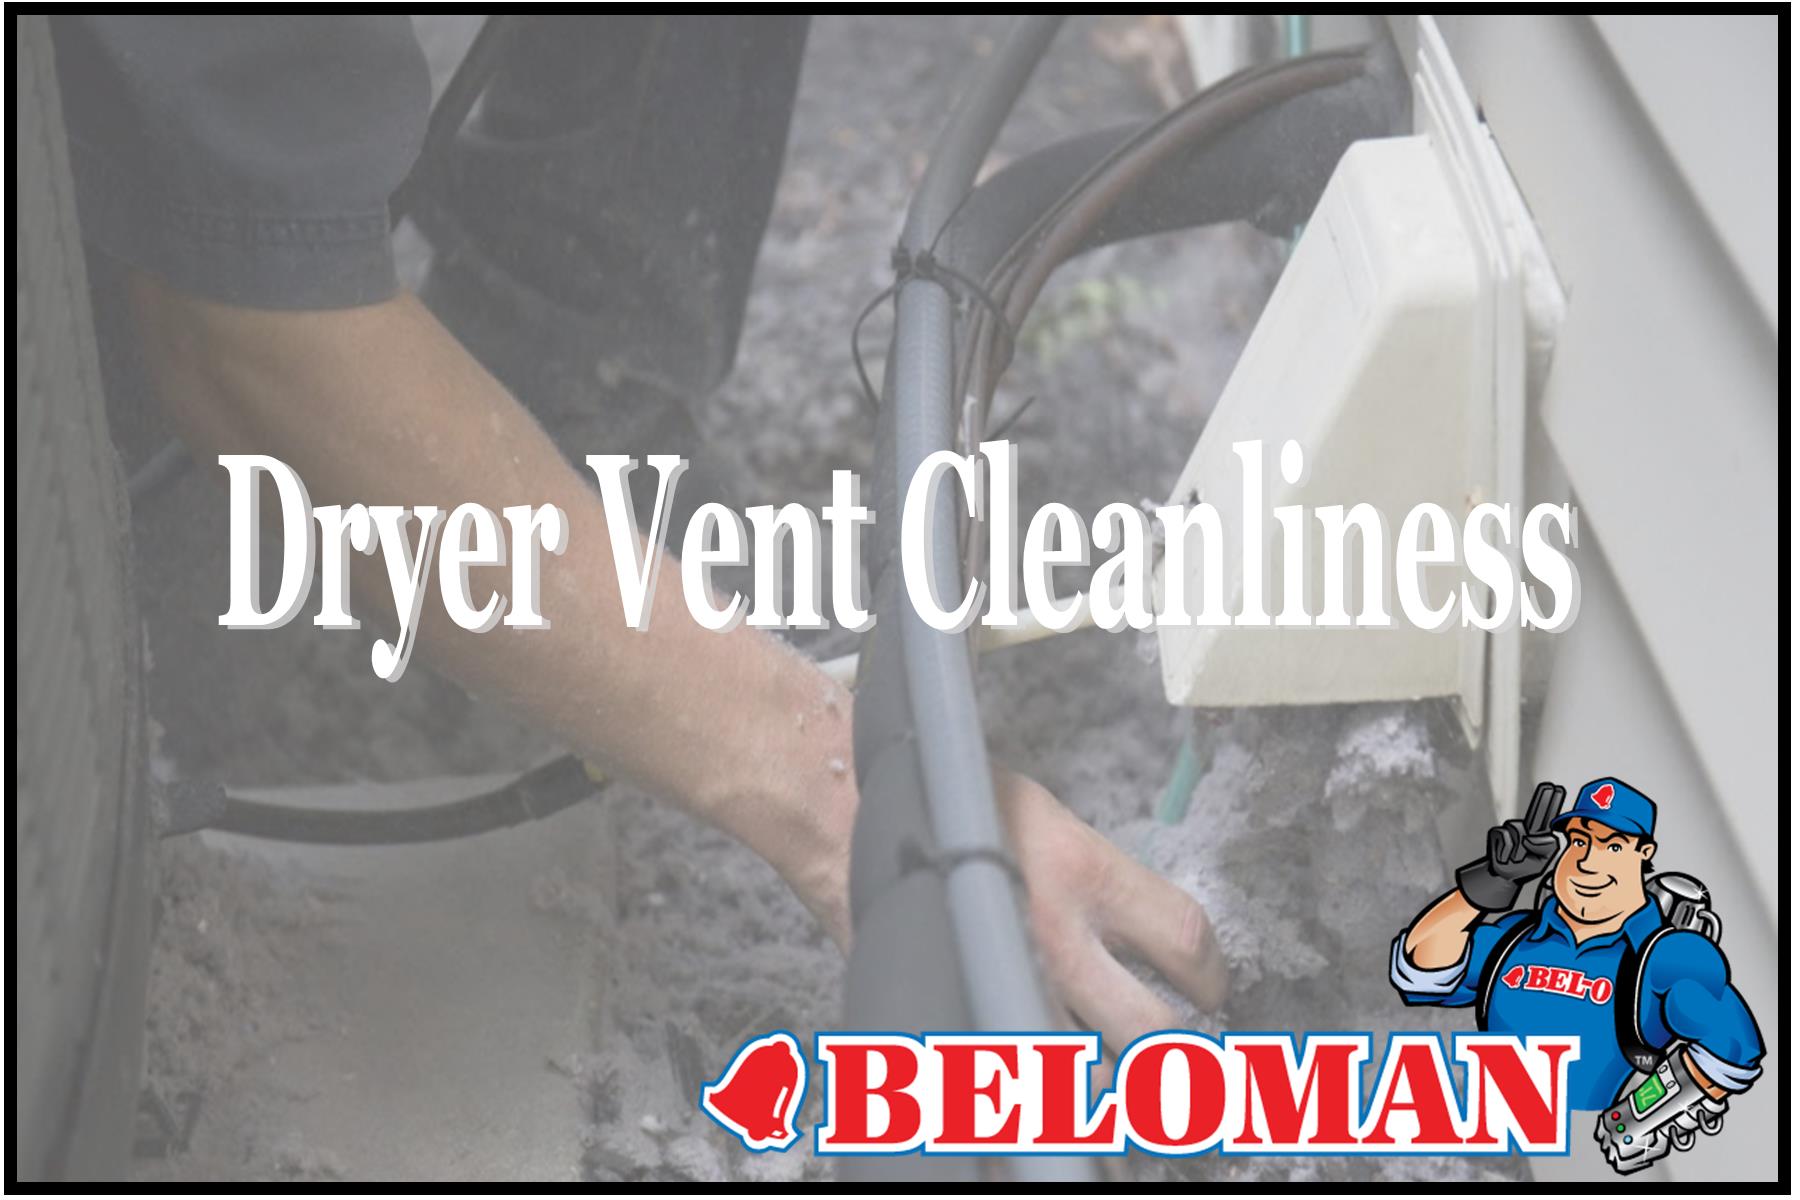 B.88 Dryer Vent Cleanliness